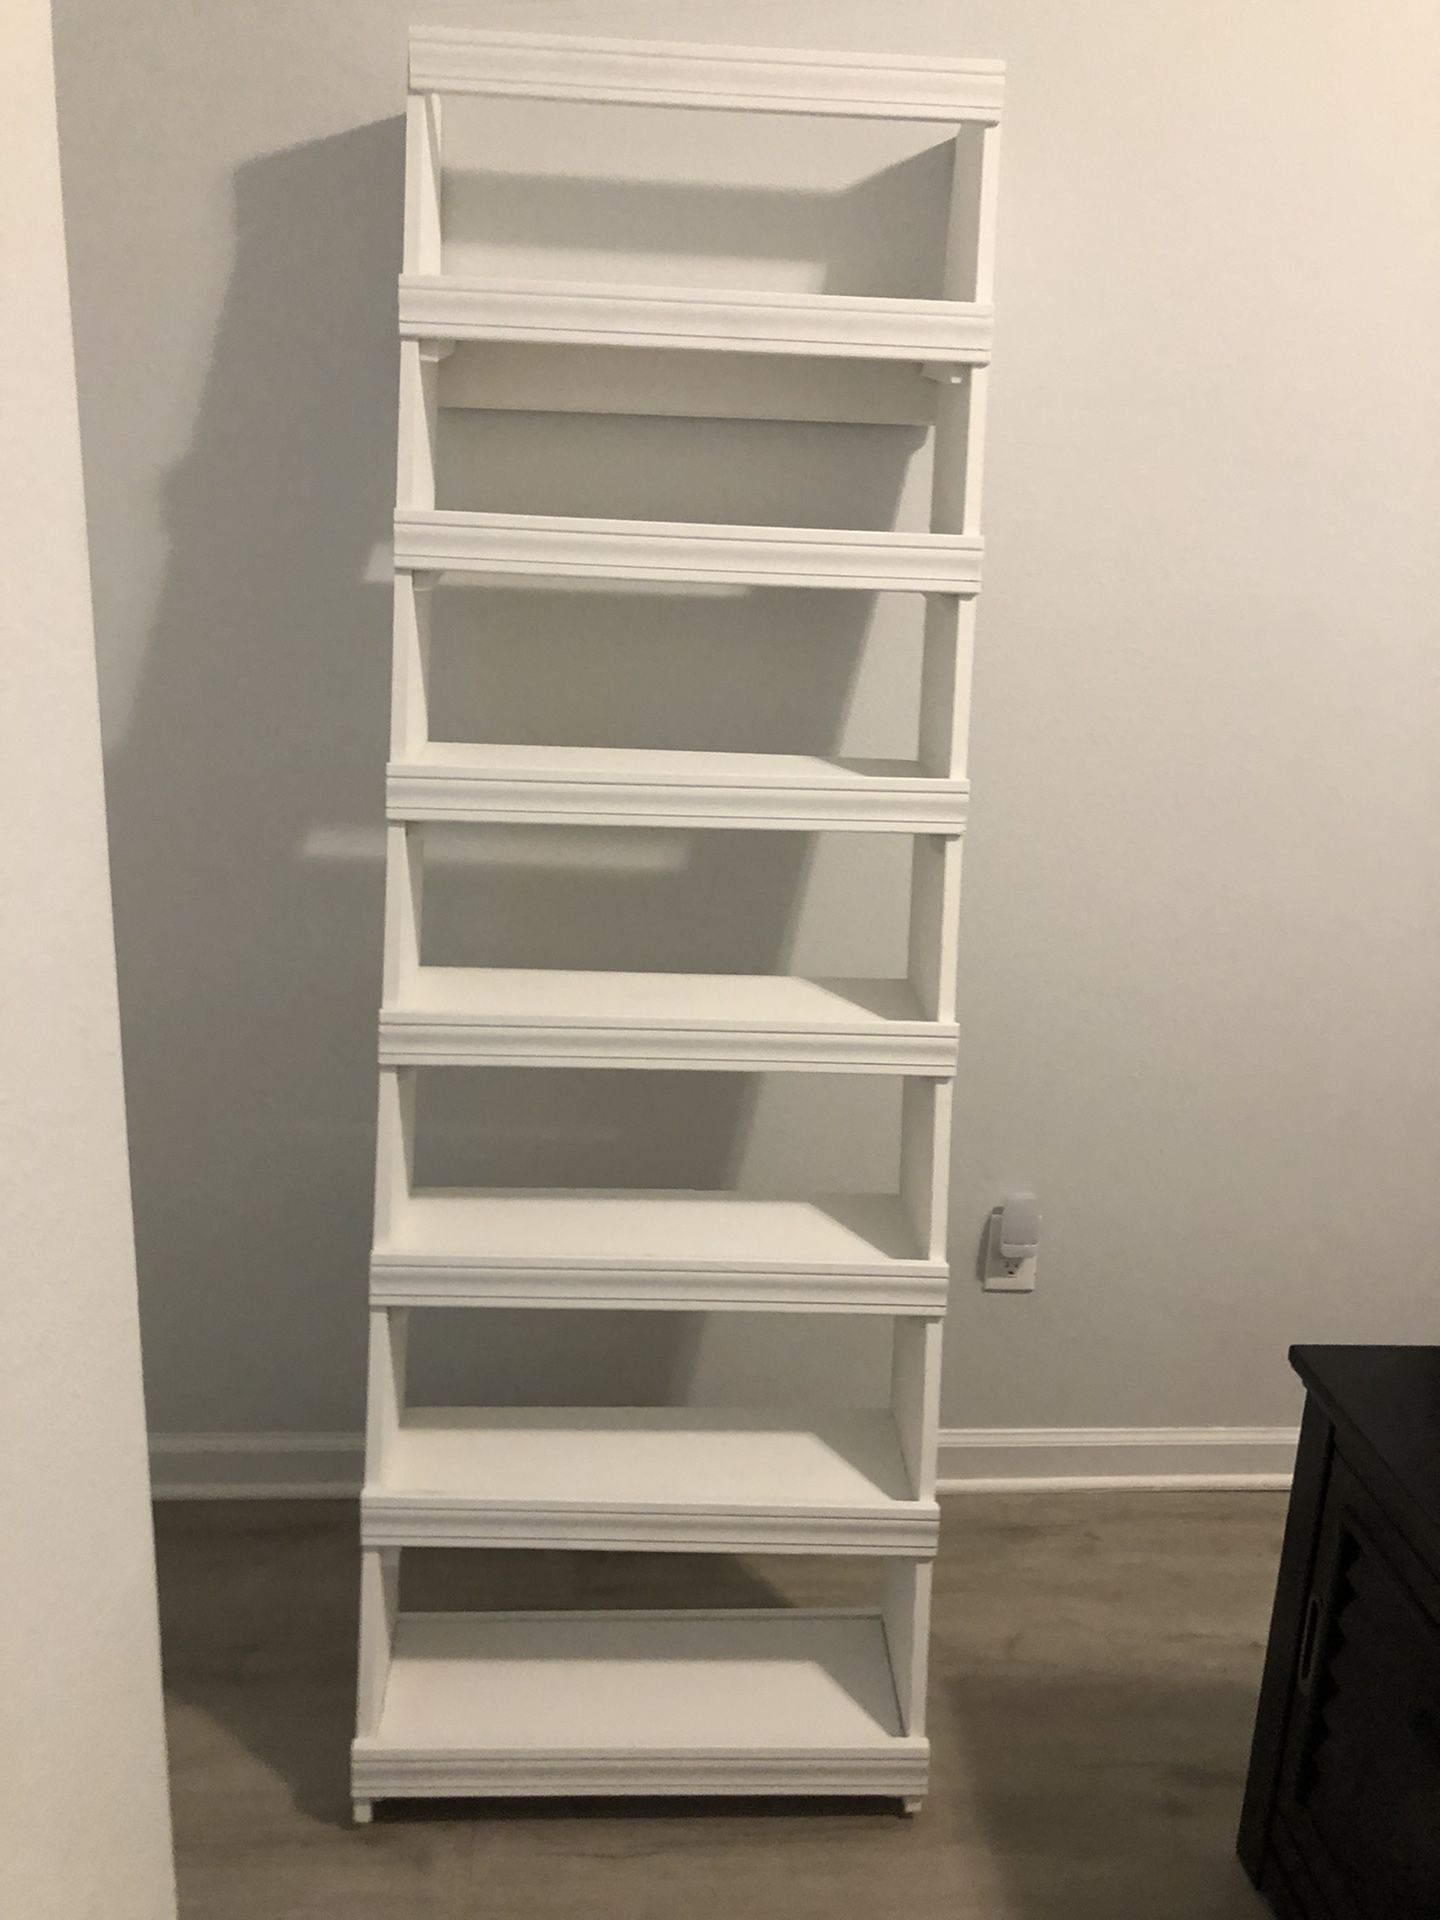 Ladder Shelf For Shoes 30x72x12 Inch